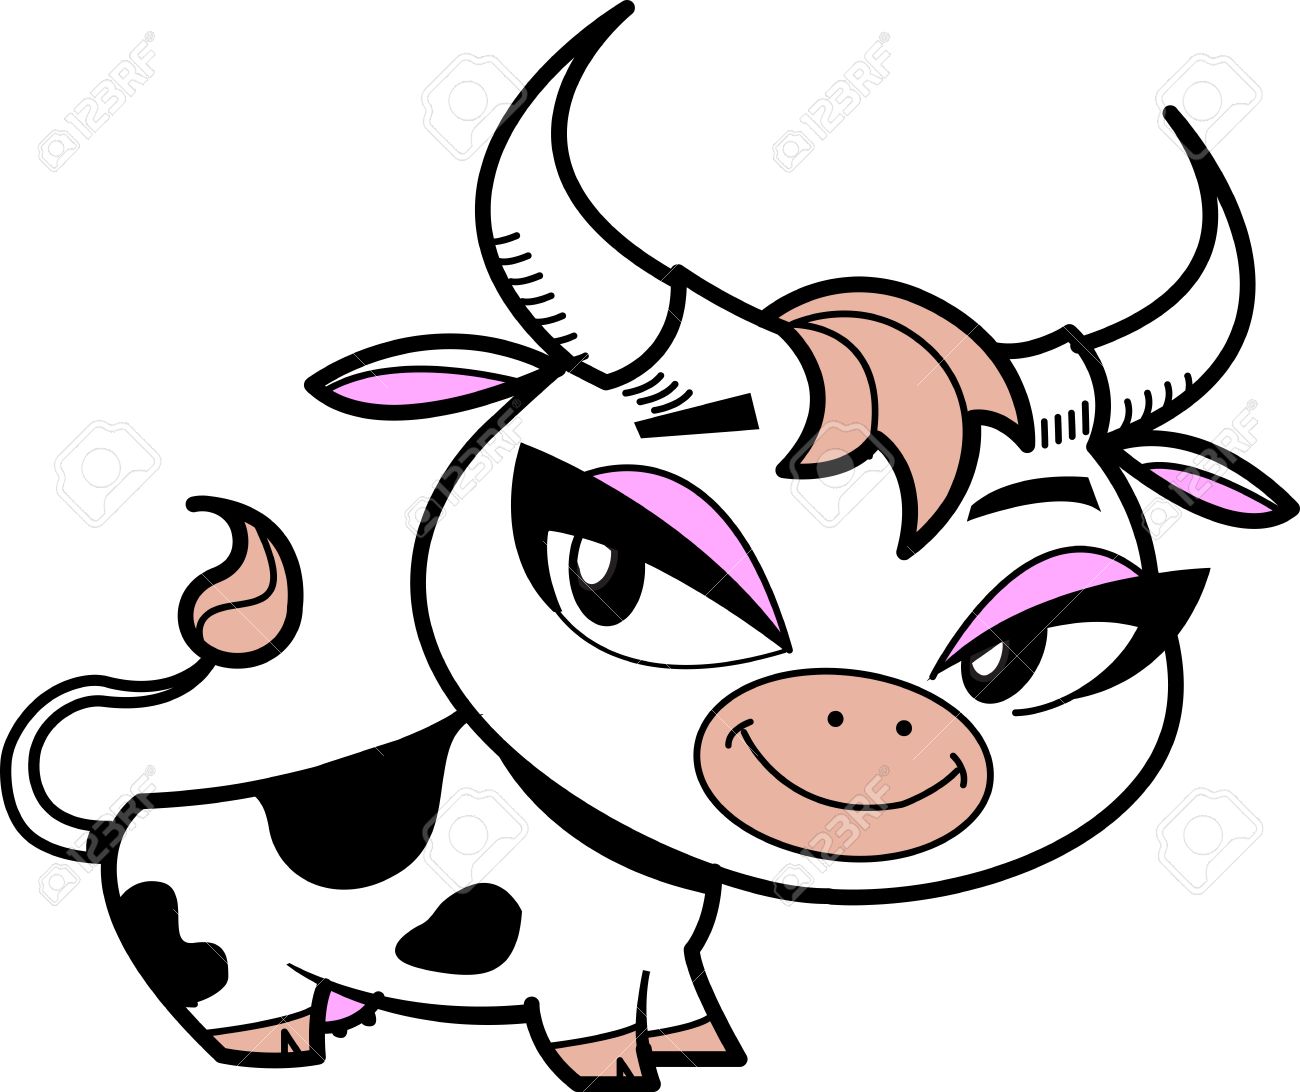 Cute Little Smiling Cartoon Cow With Pretty Eyes Royalty Free.